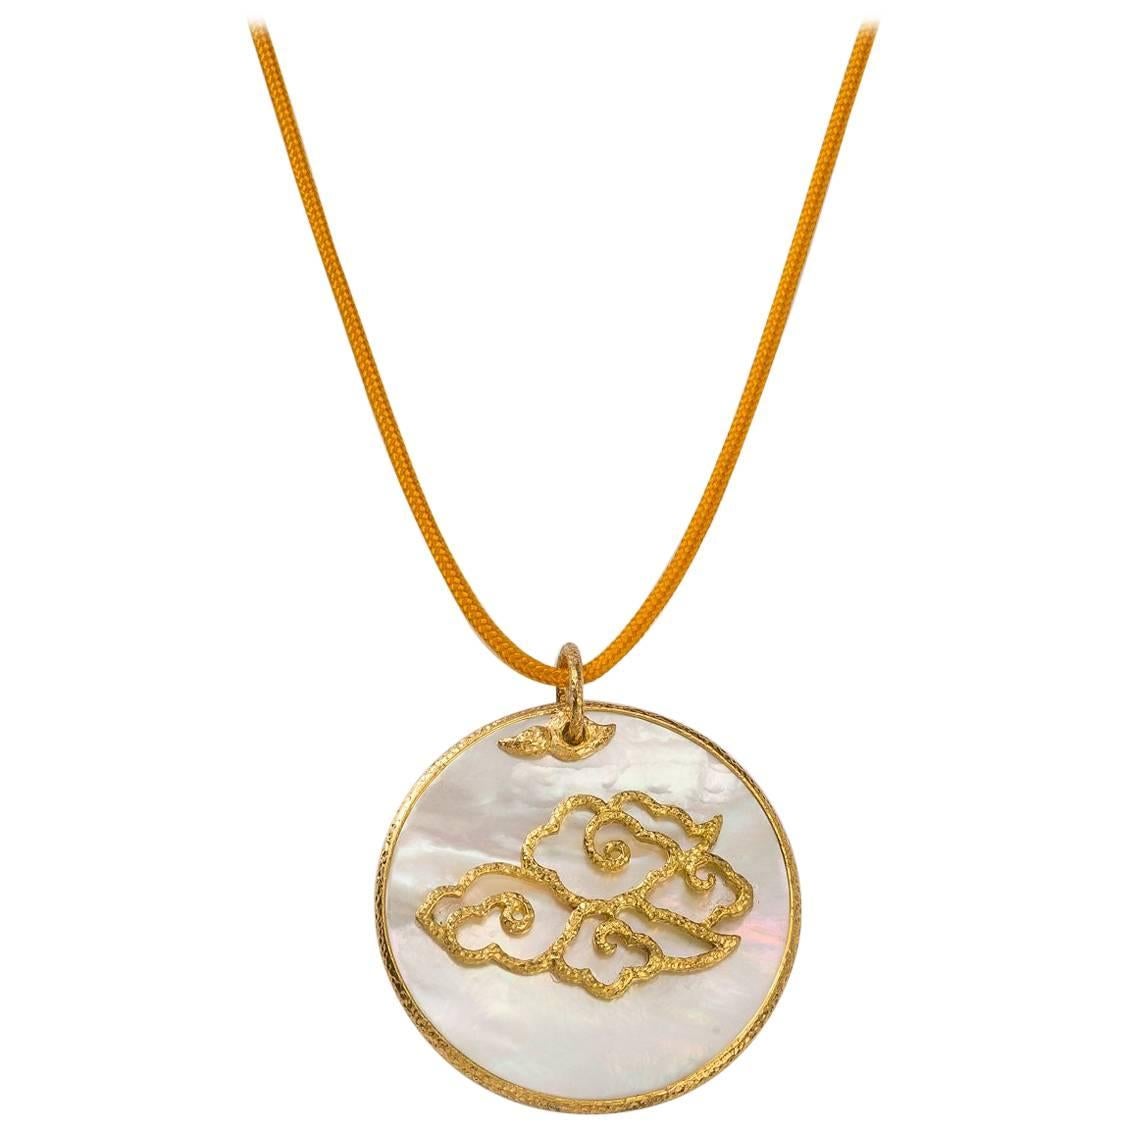 Hand-Worked Chinoiserie Pendant, Hand-Hammered 18 Karat Gold and Mother-of-Pearl